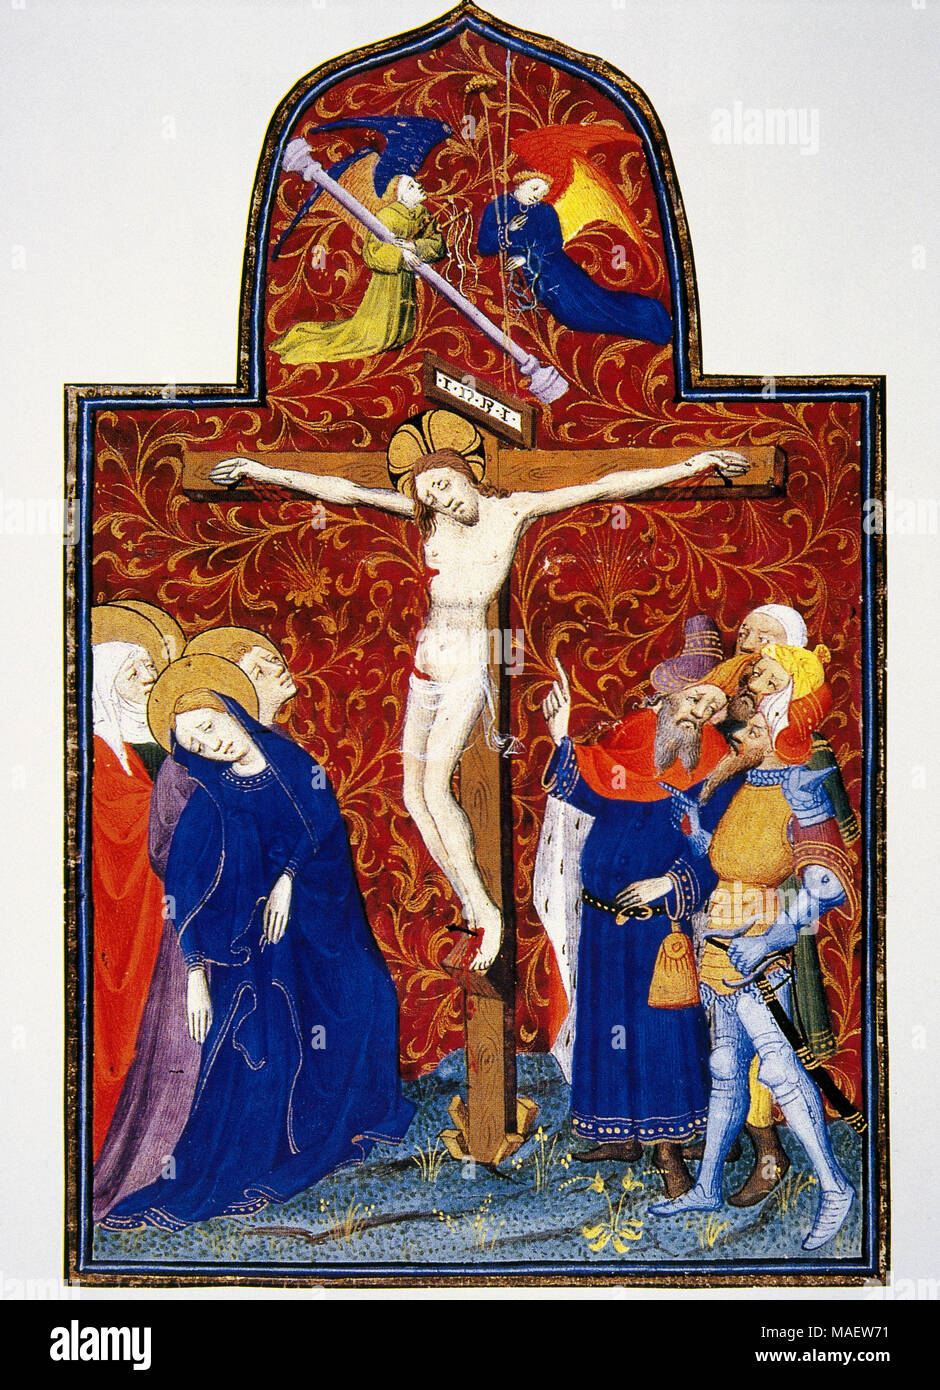 Jesuchrist crucified and two angels, one of them carrying a crown of thorns and the other one with an instrument of torture. The Virgin Mary is crying at the foot of the cross. Miniature from a Book of hours, 14th century. Conde Museum. Chateau of Chantilly. France. Stock Photo